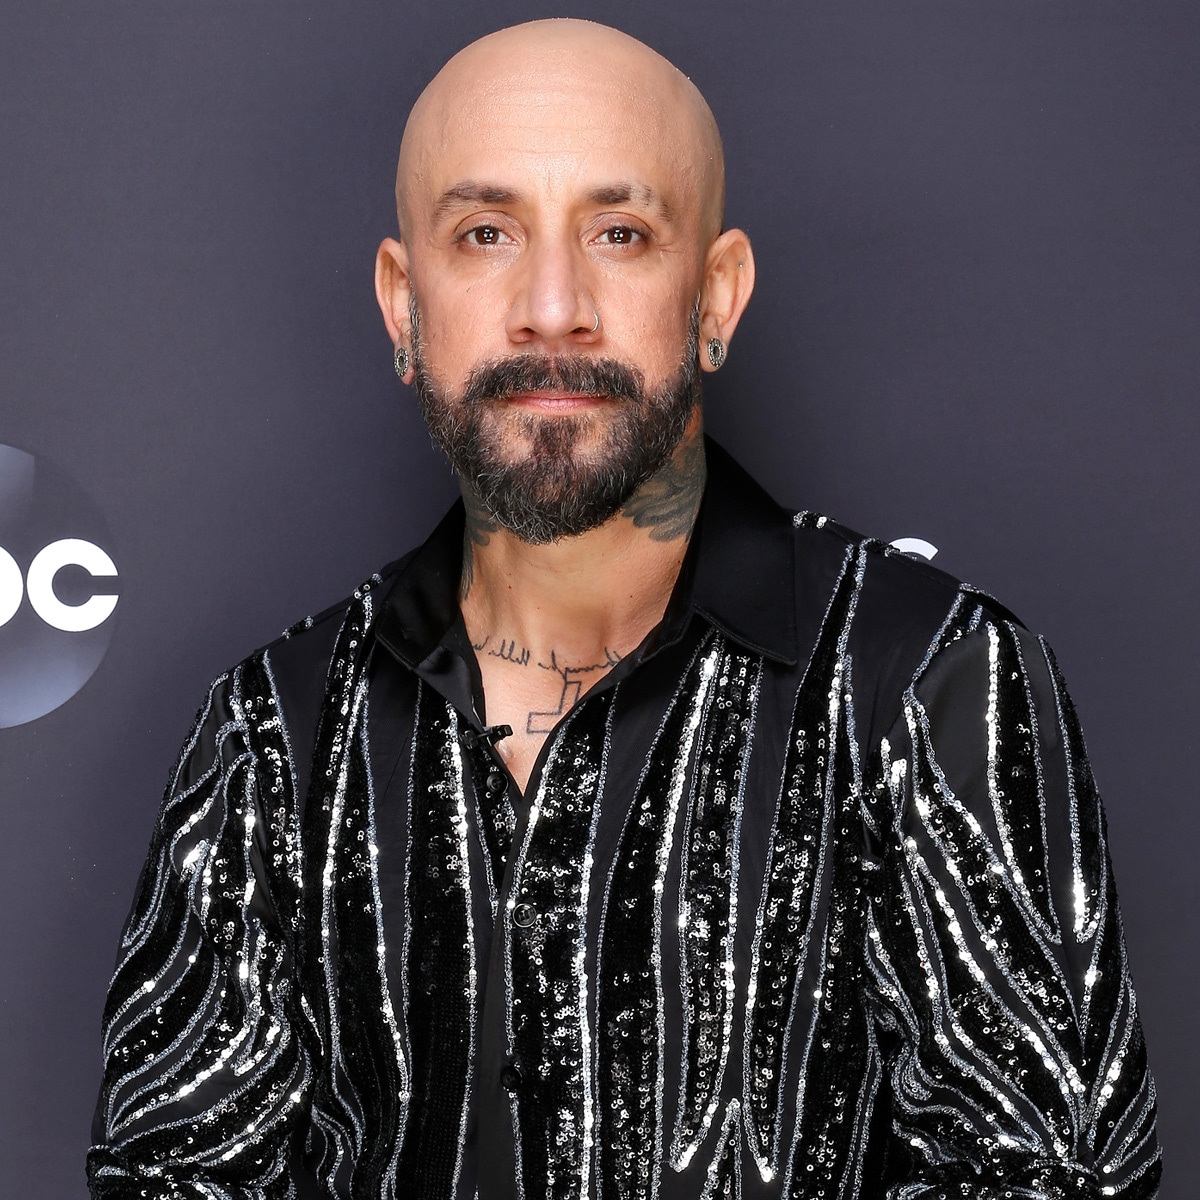 AJ McLean Is Nearly Unrecognizable After Shaving His Face - E! Online